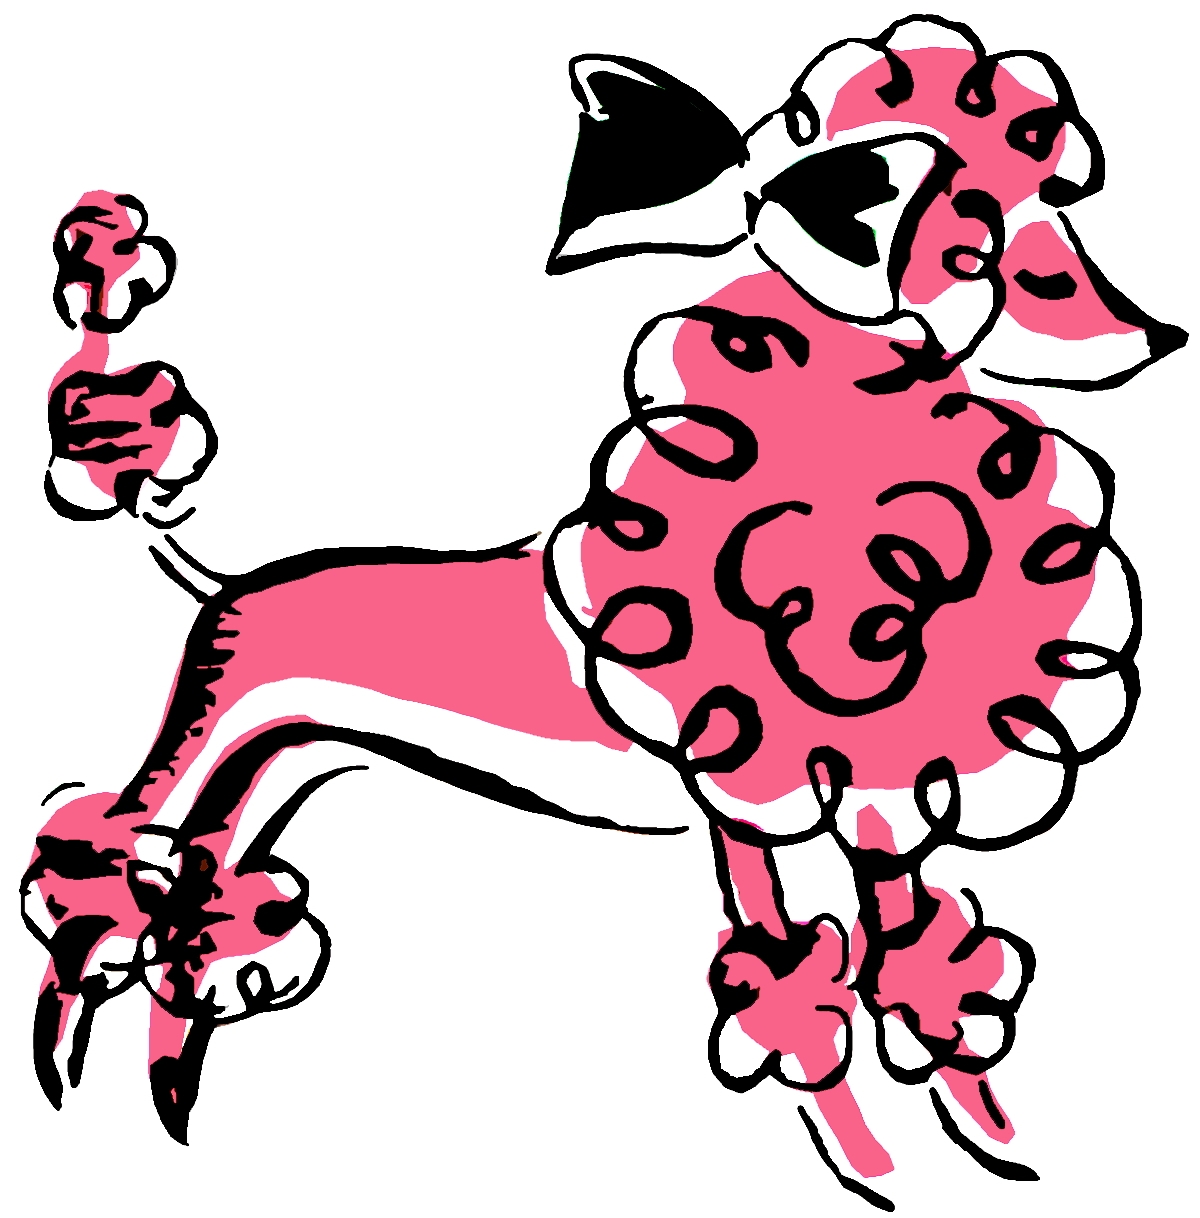 Poodle clipart #5, Download drawings